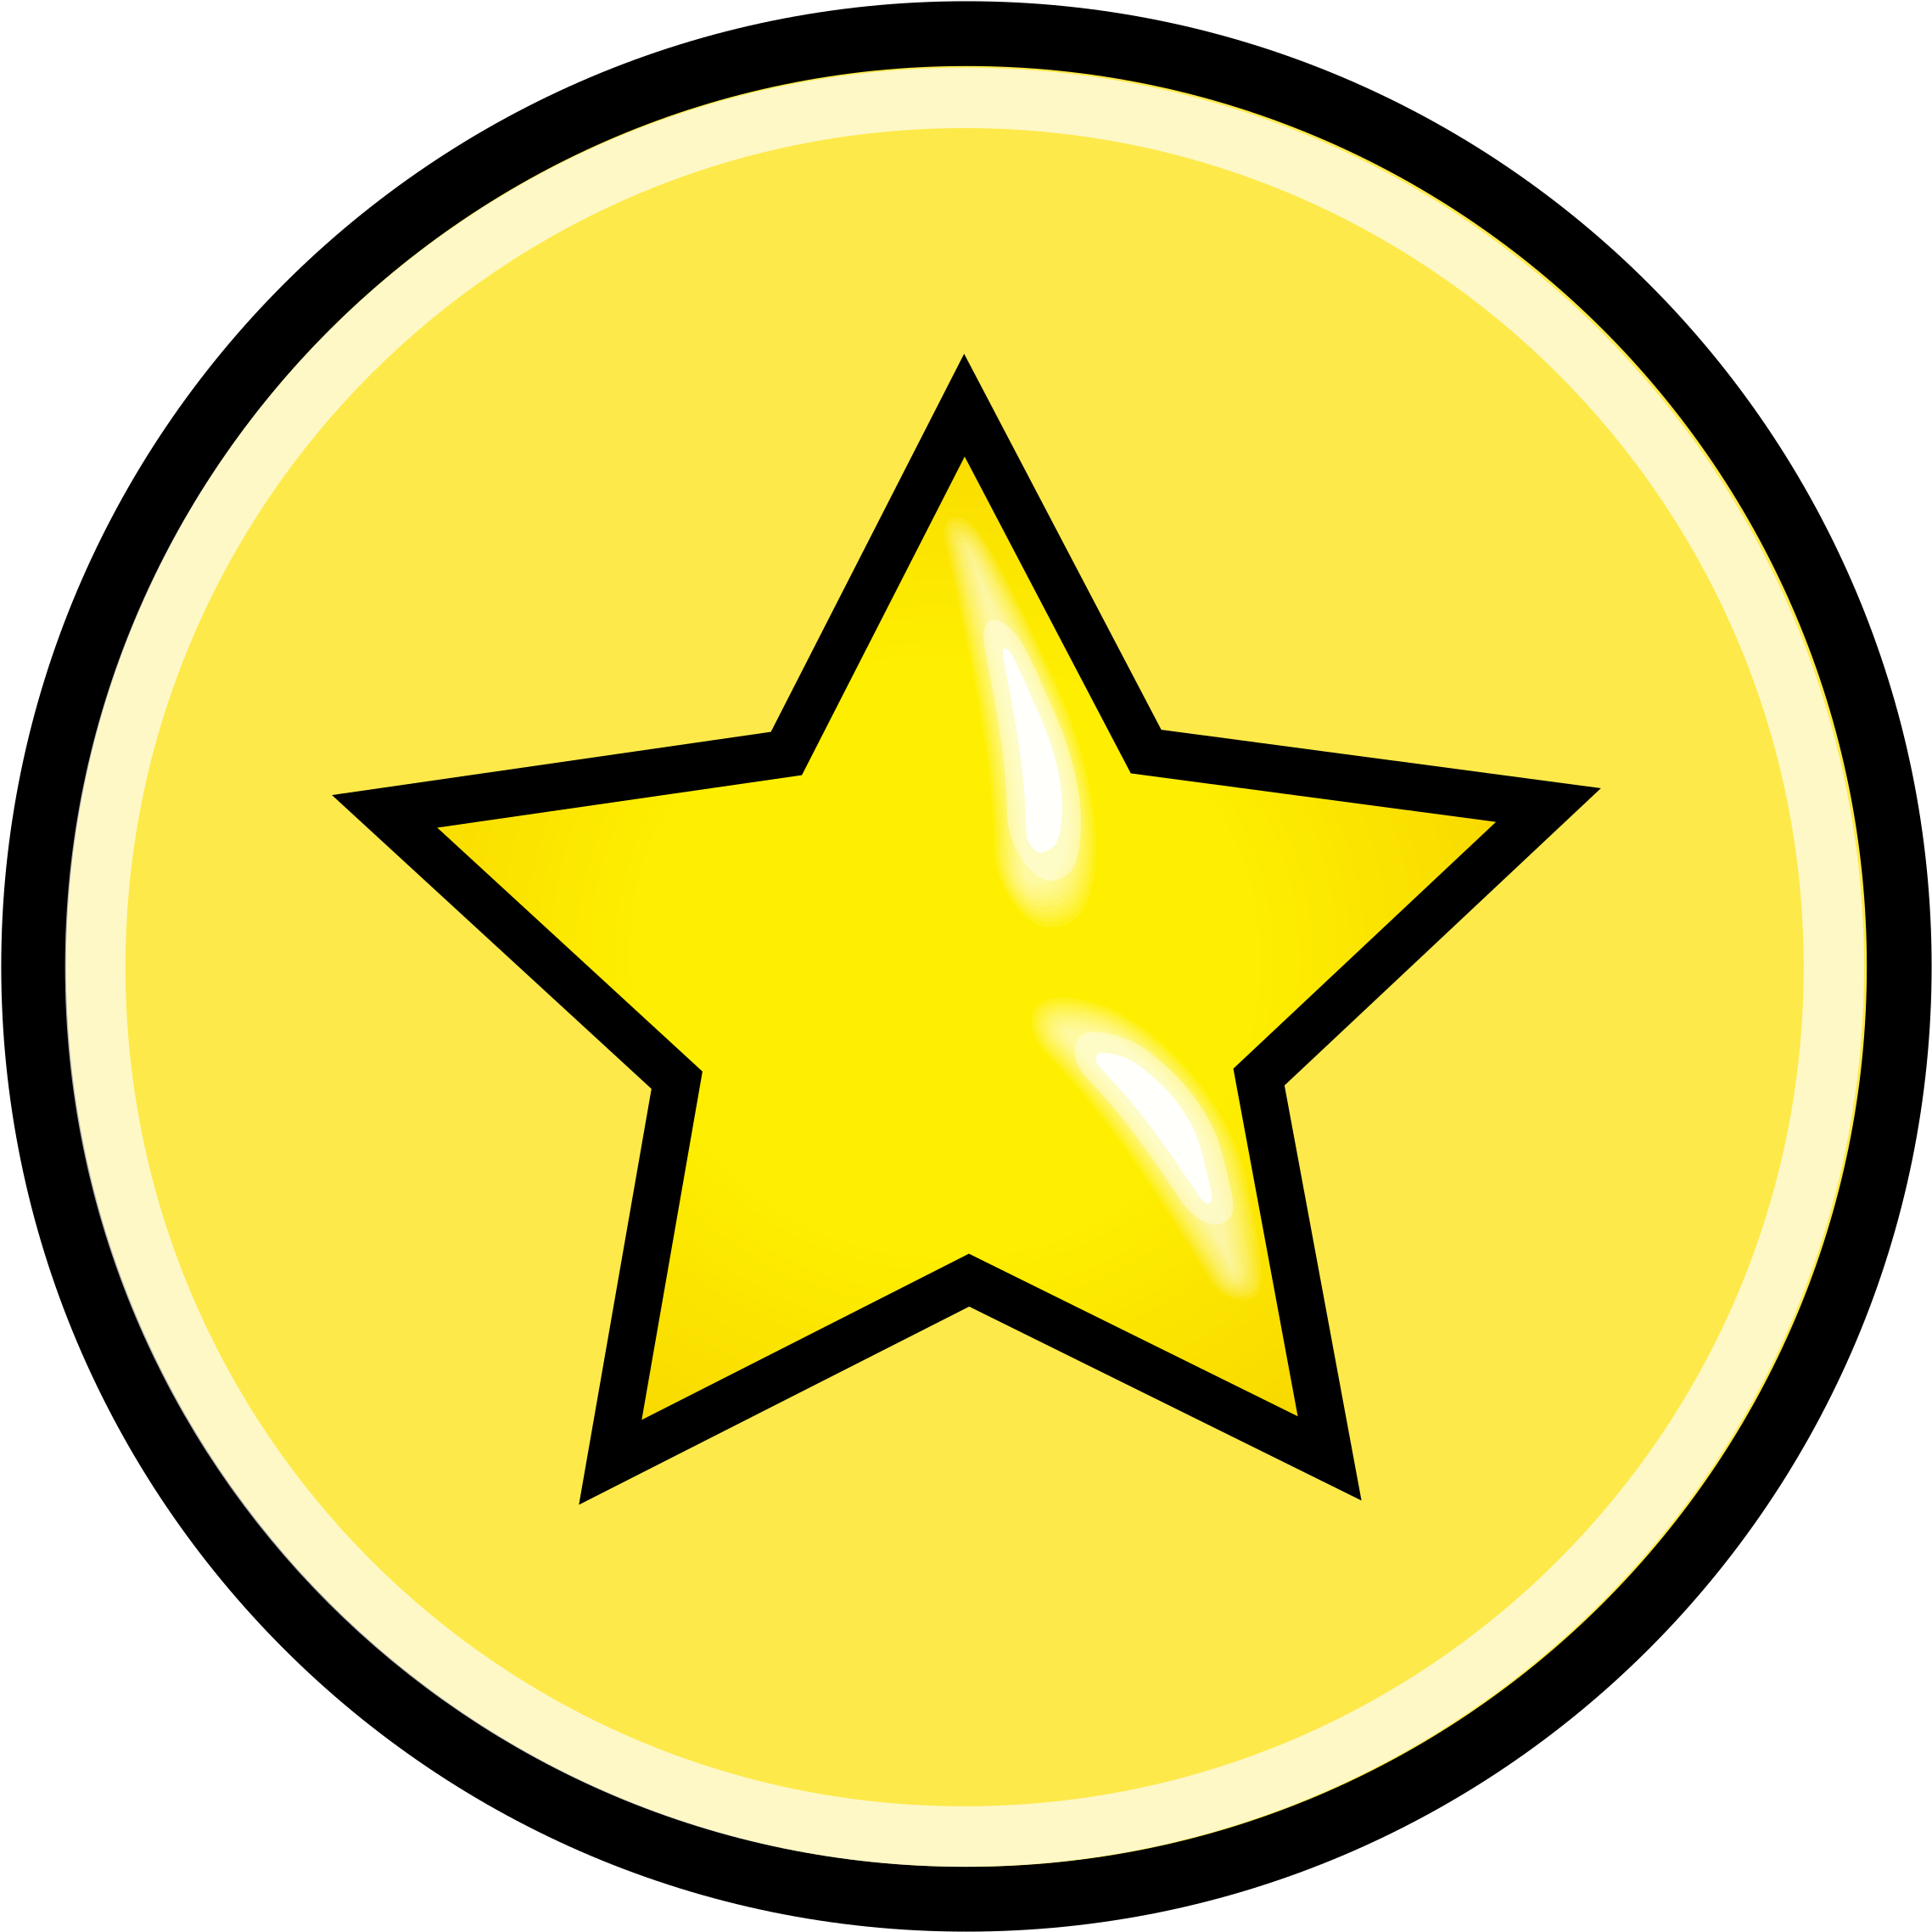 Star Vector Png 2277 X 2277